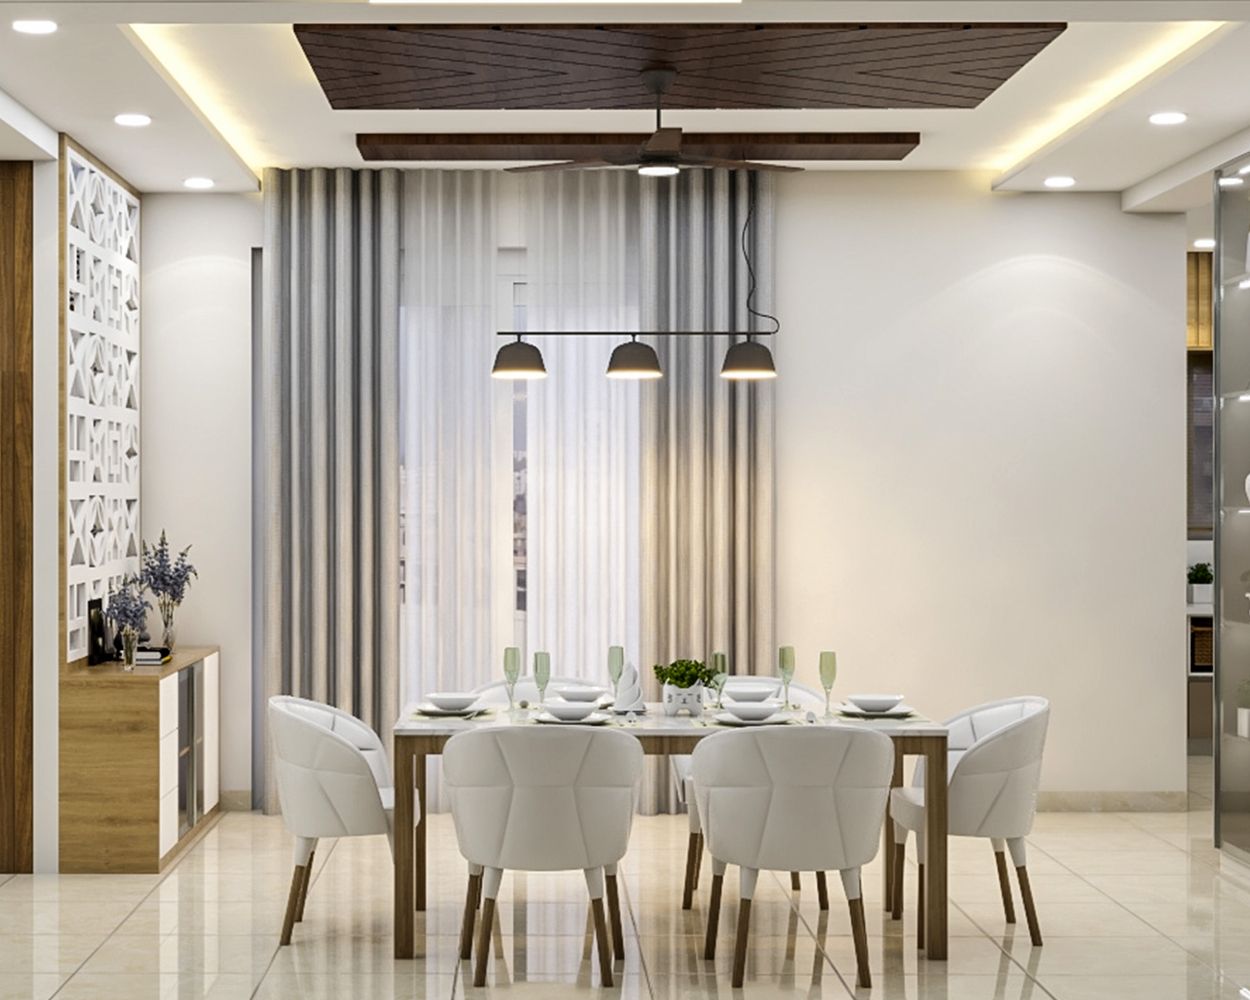 Contemporary 6-Seater White And Wood Dining Room Design With PVC False Ceiling